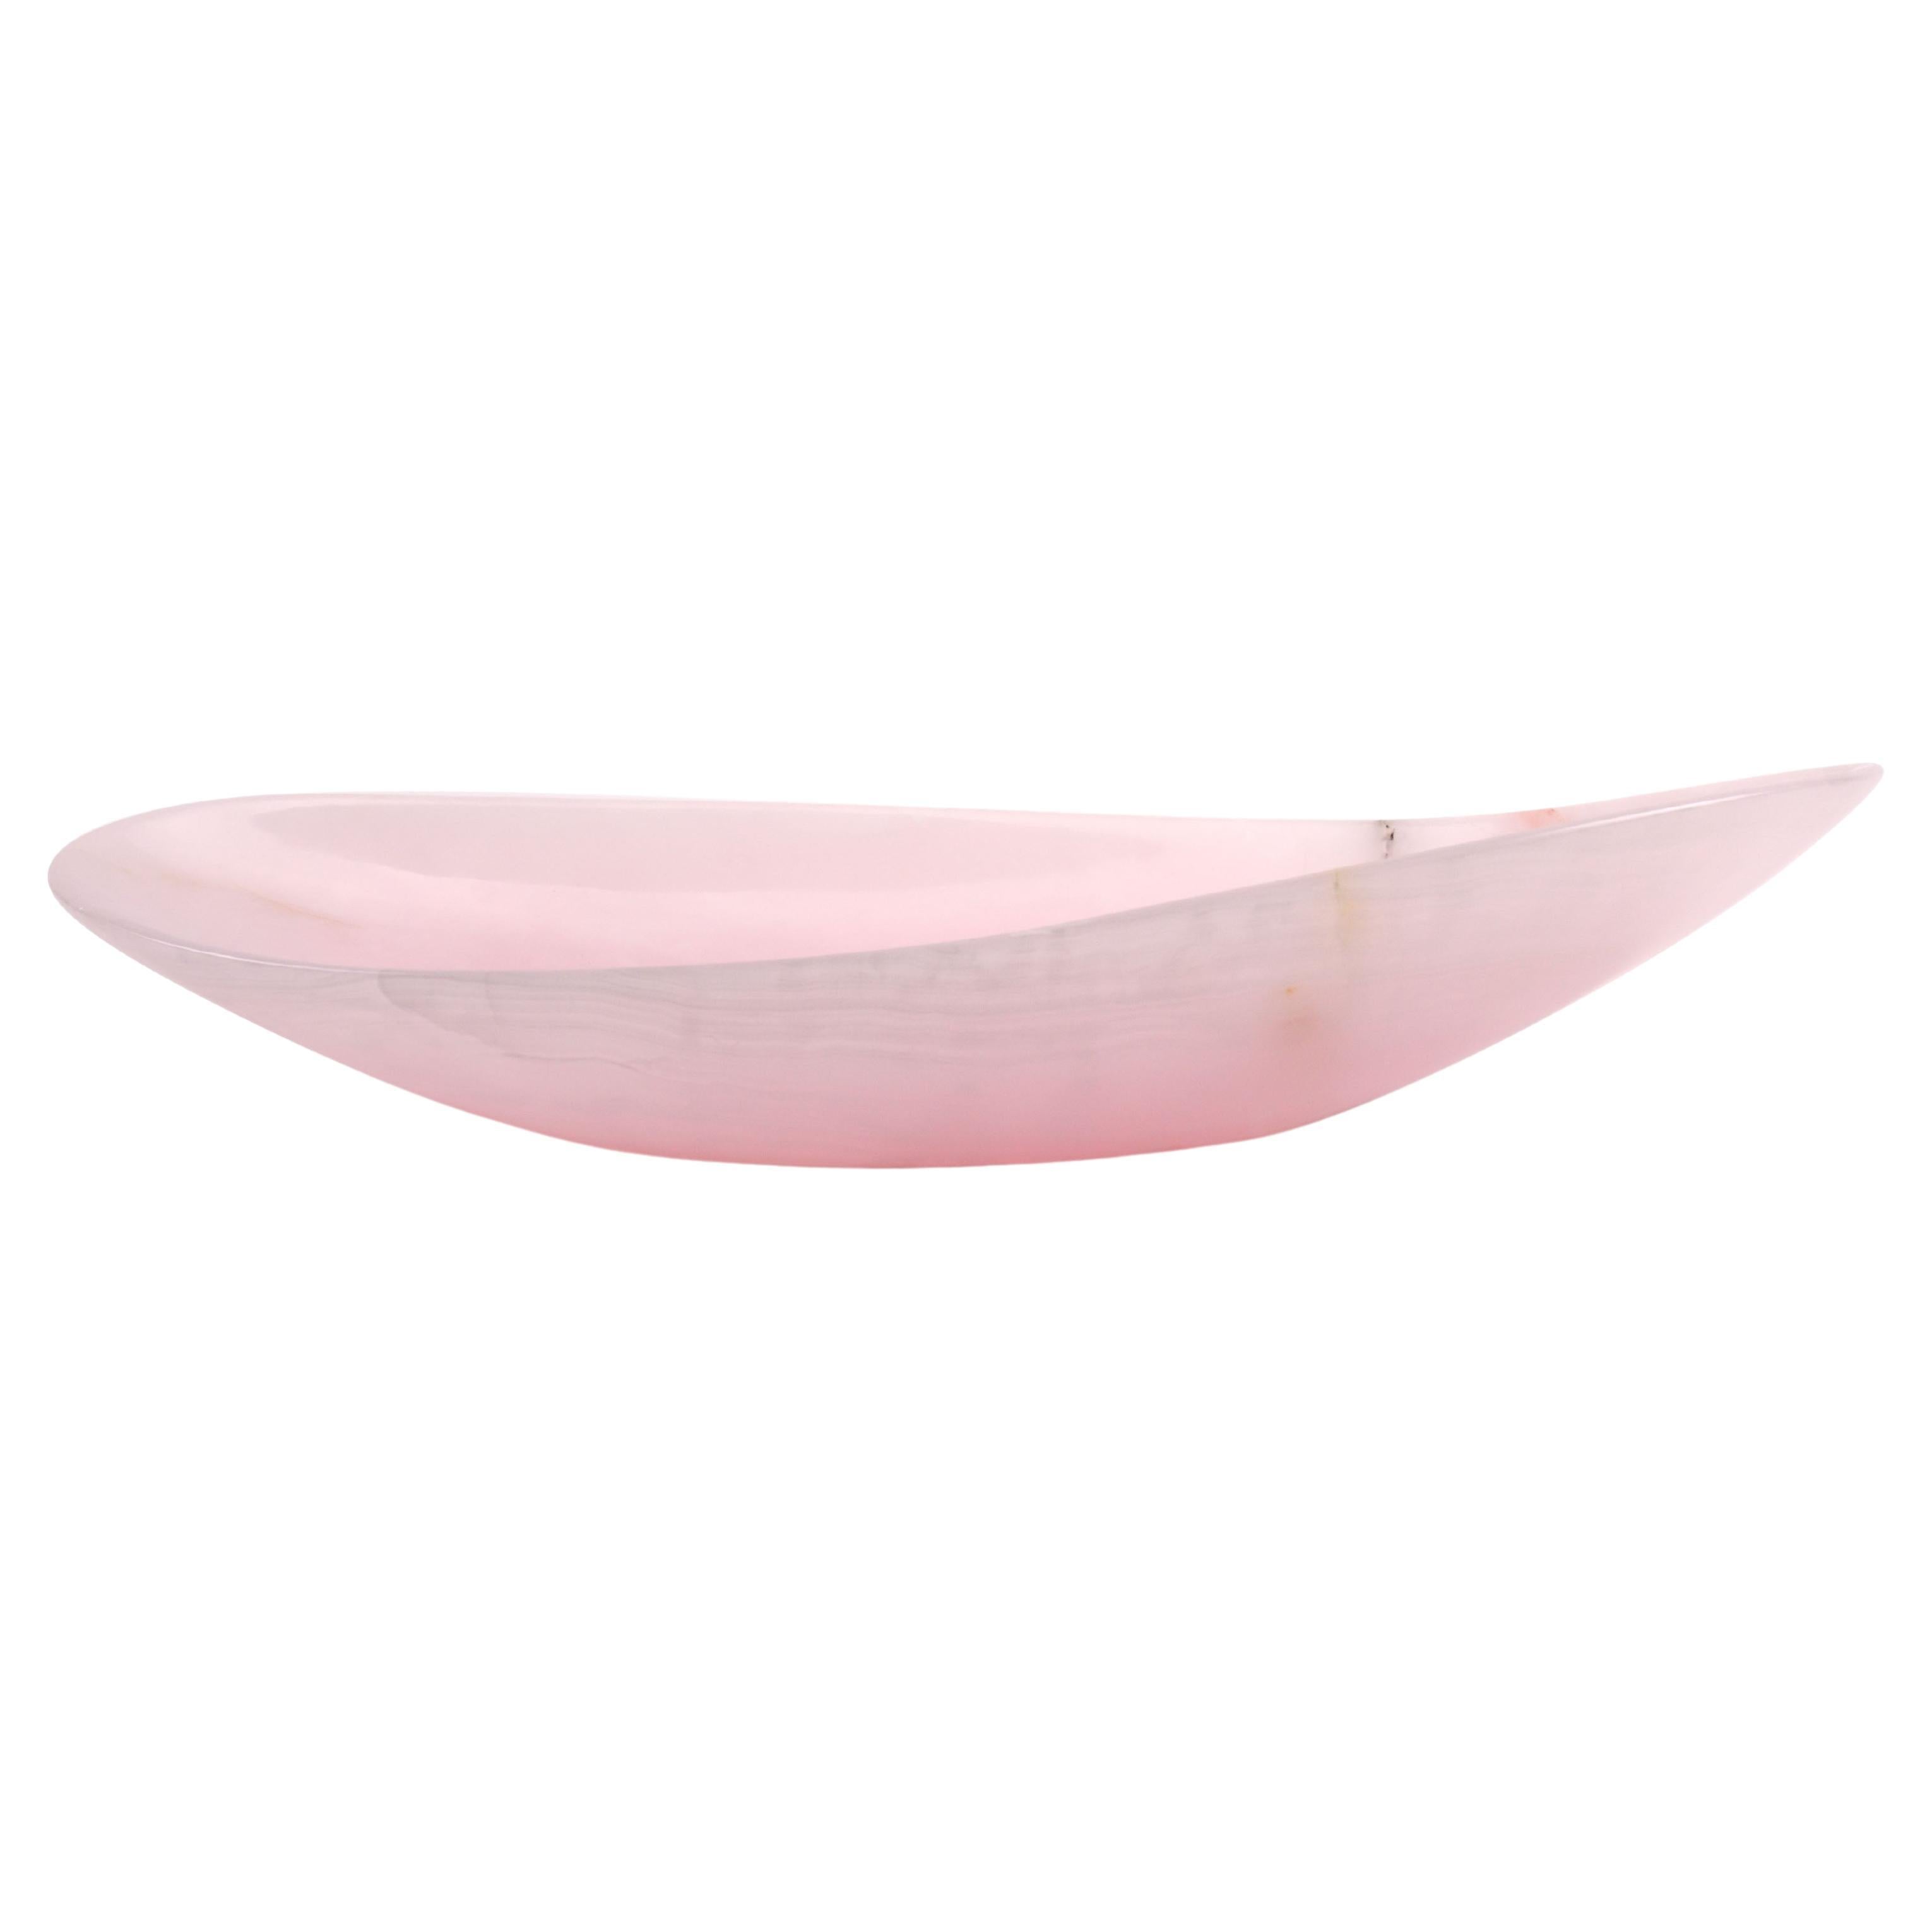 Bowl sculpted by hand from a solid block of Pink onyx. The polished finishing underlines the transparency of the onyx making this a very precious object. 

Bowl dimensions: Medium L 45 x W 22 x H 10 cm. 
Also available Big L 56 x W 27 x H12 cm.